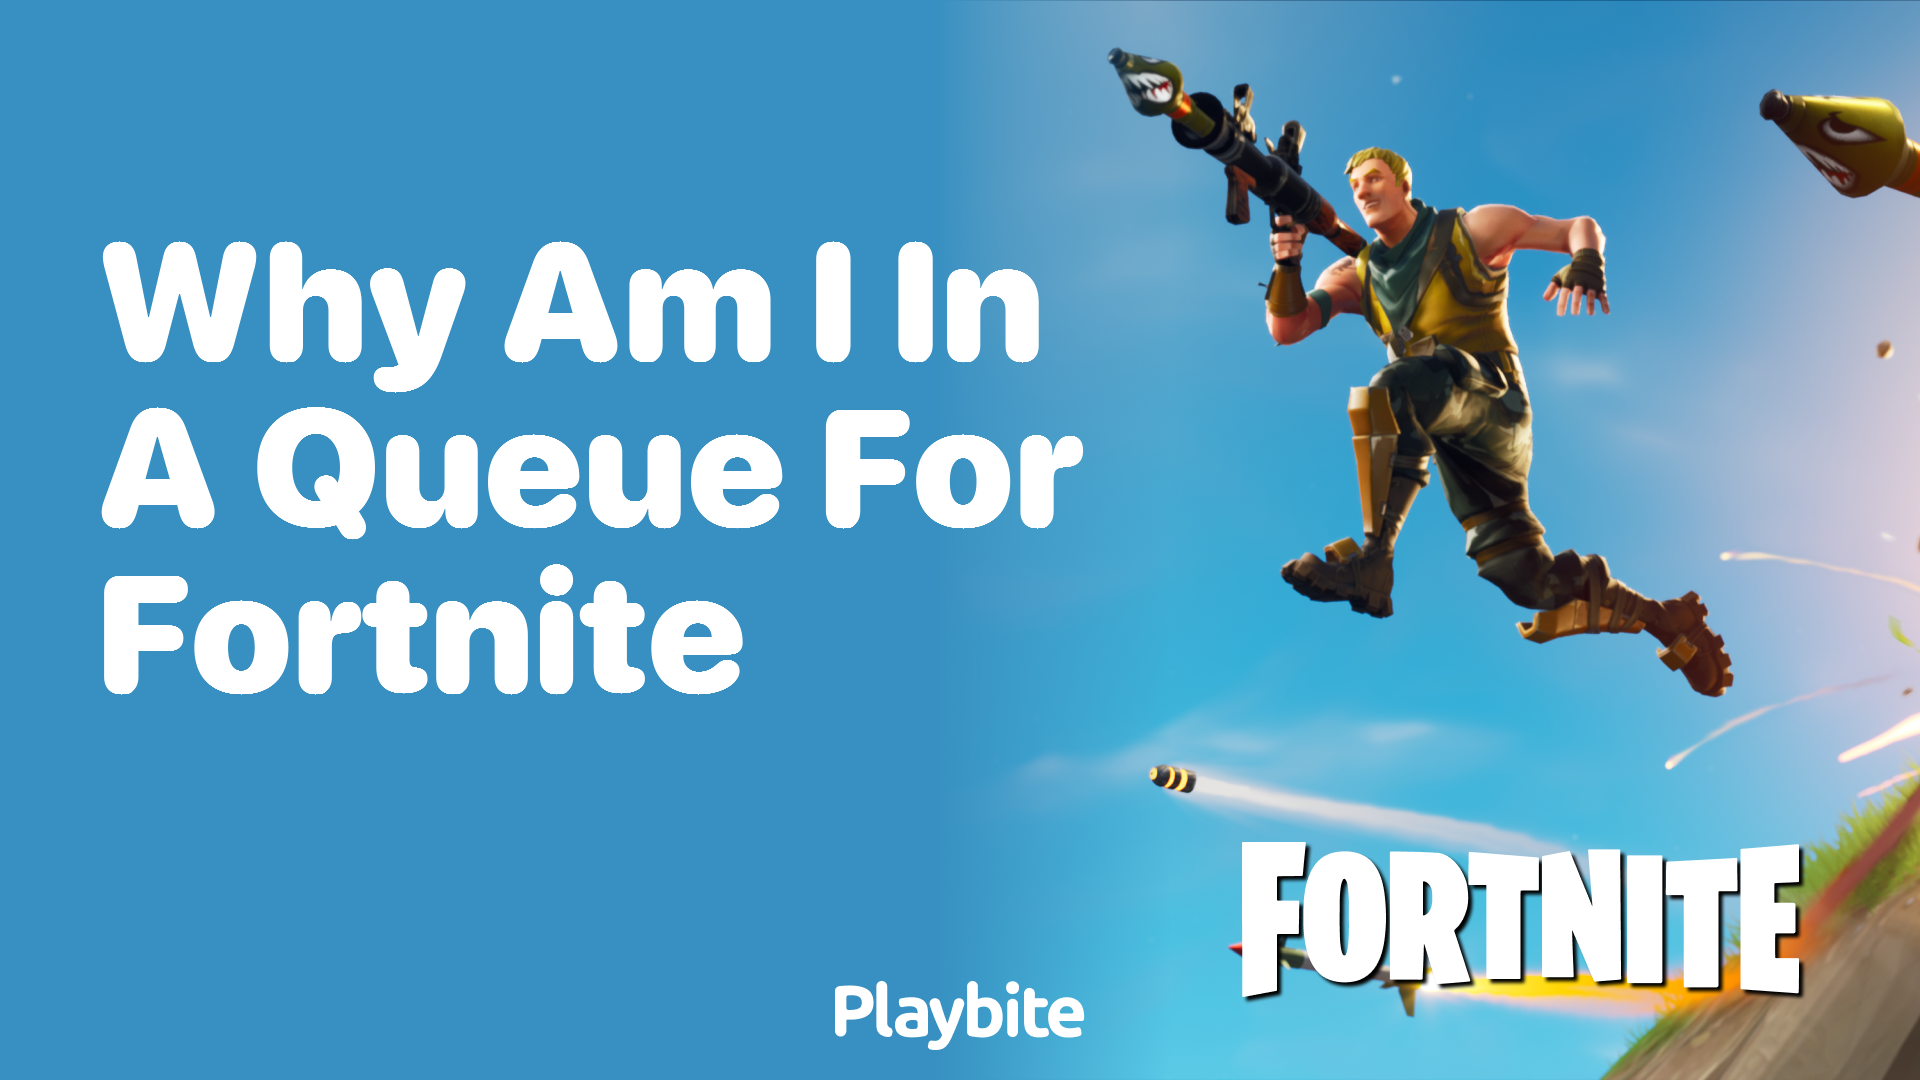 Why Am I in a Queue for Fortnite? - Playbite